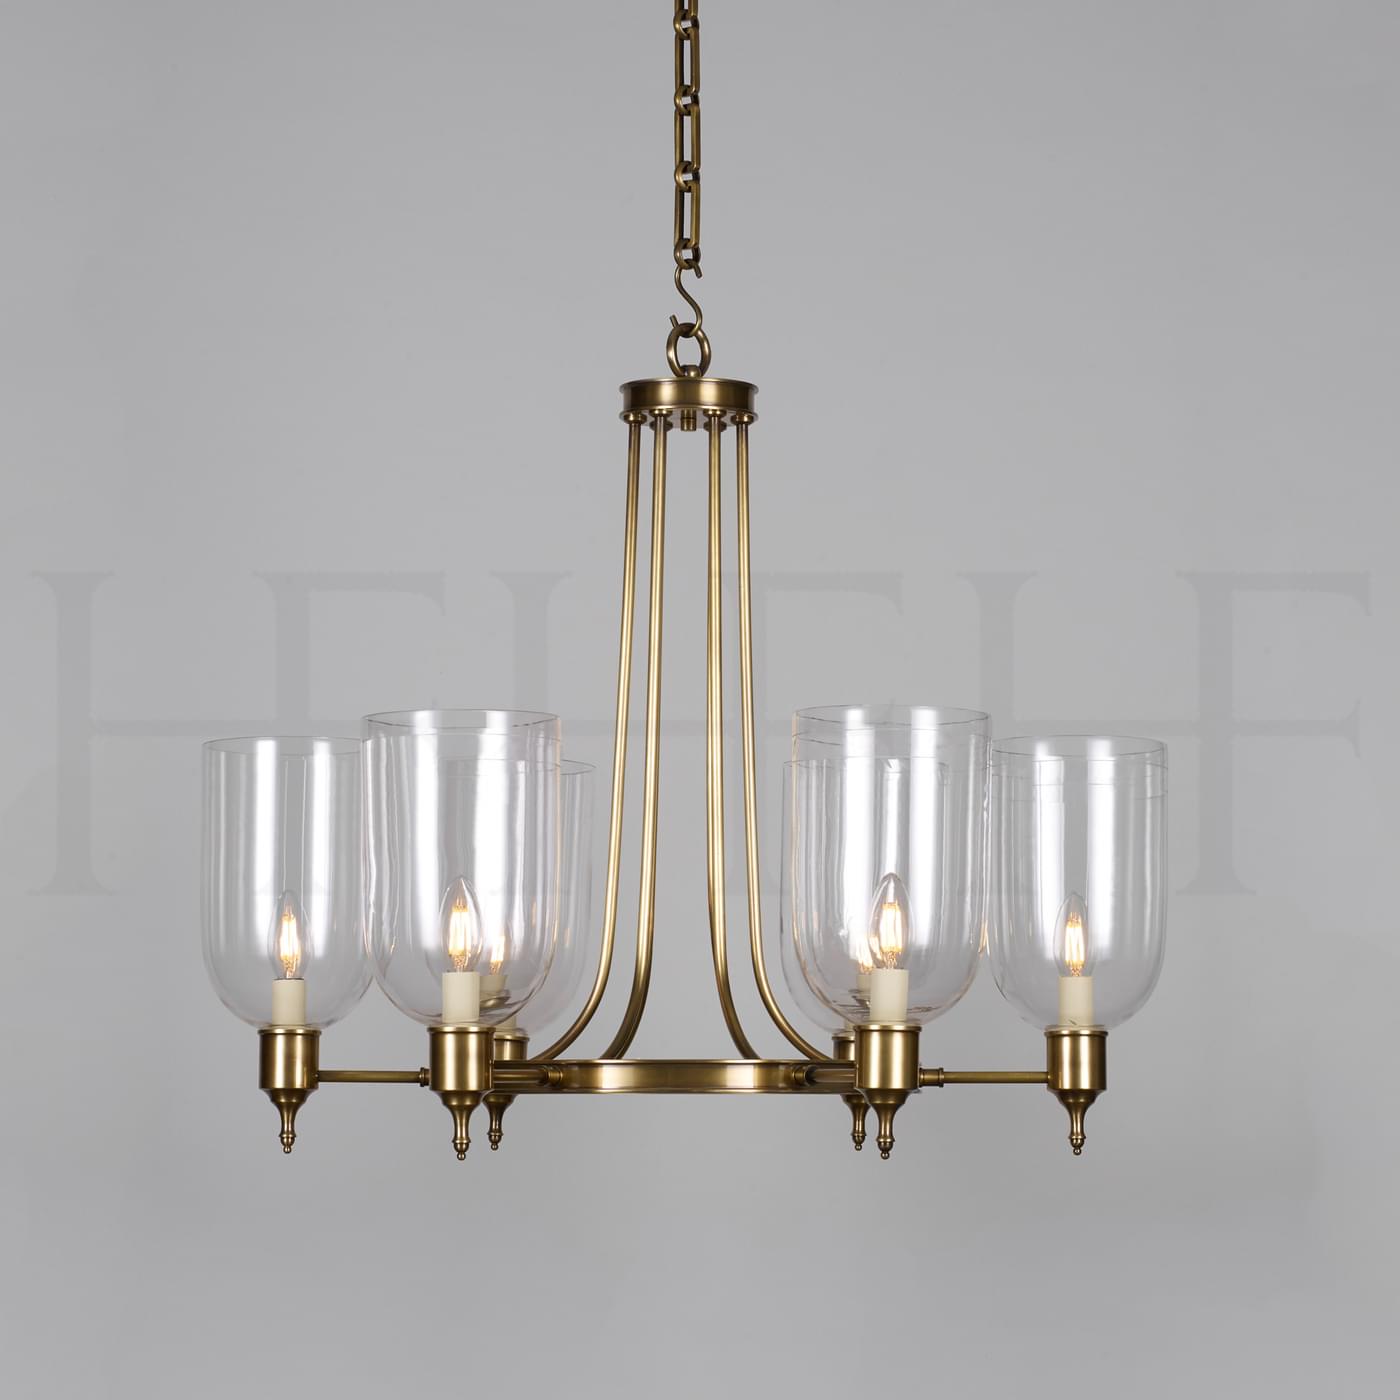 CH75 Storm Shade Chandelier L